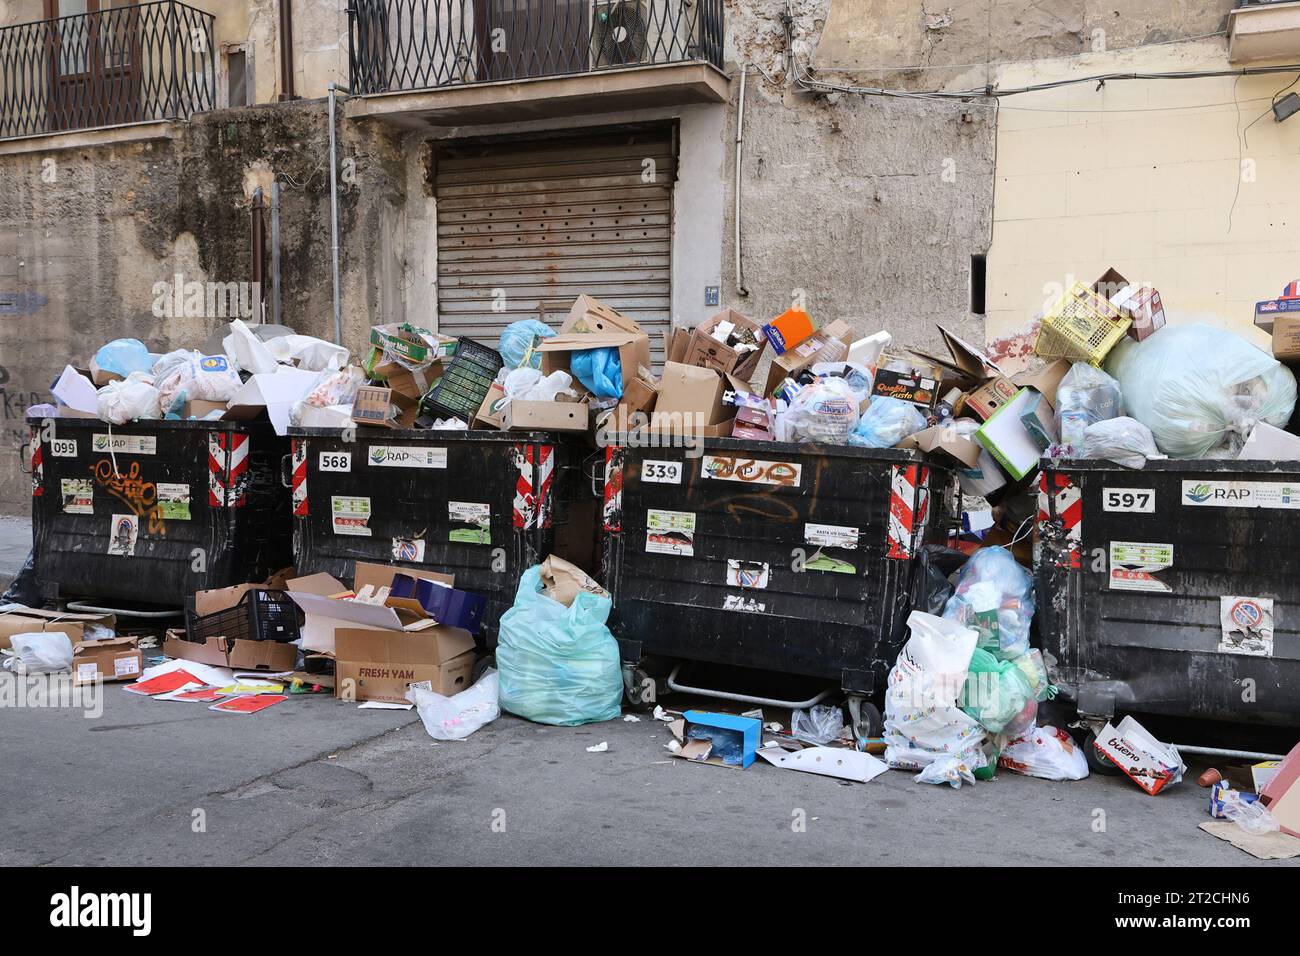 Overflowing rubbish bins in the Ballaro district of Palermo, Sicily, Italy Stock Photo